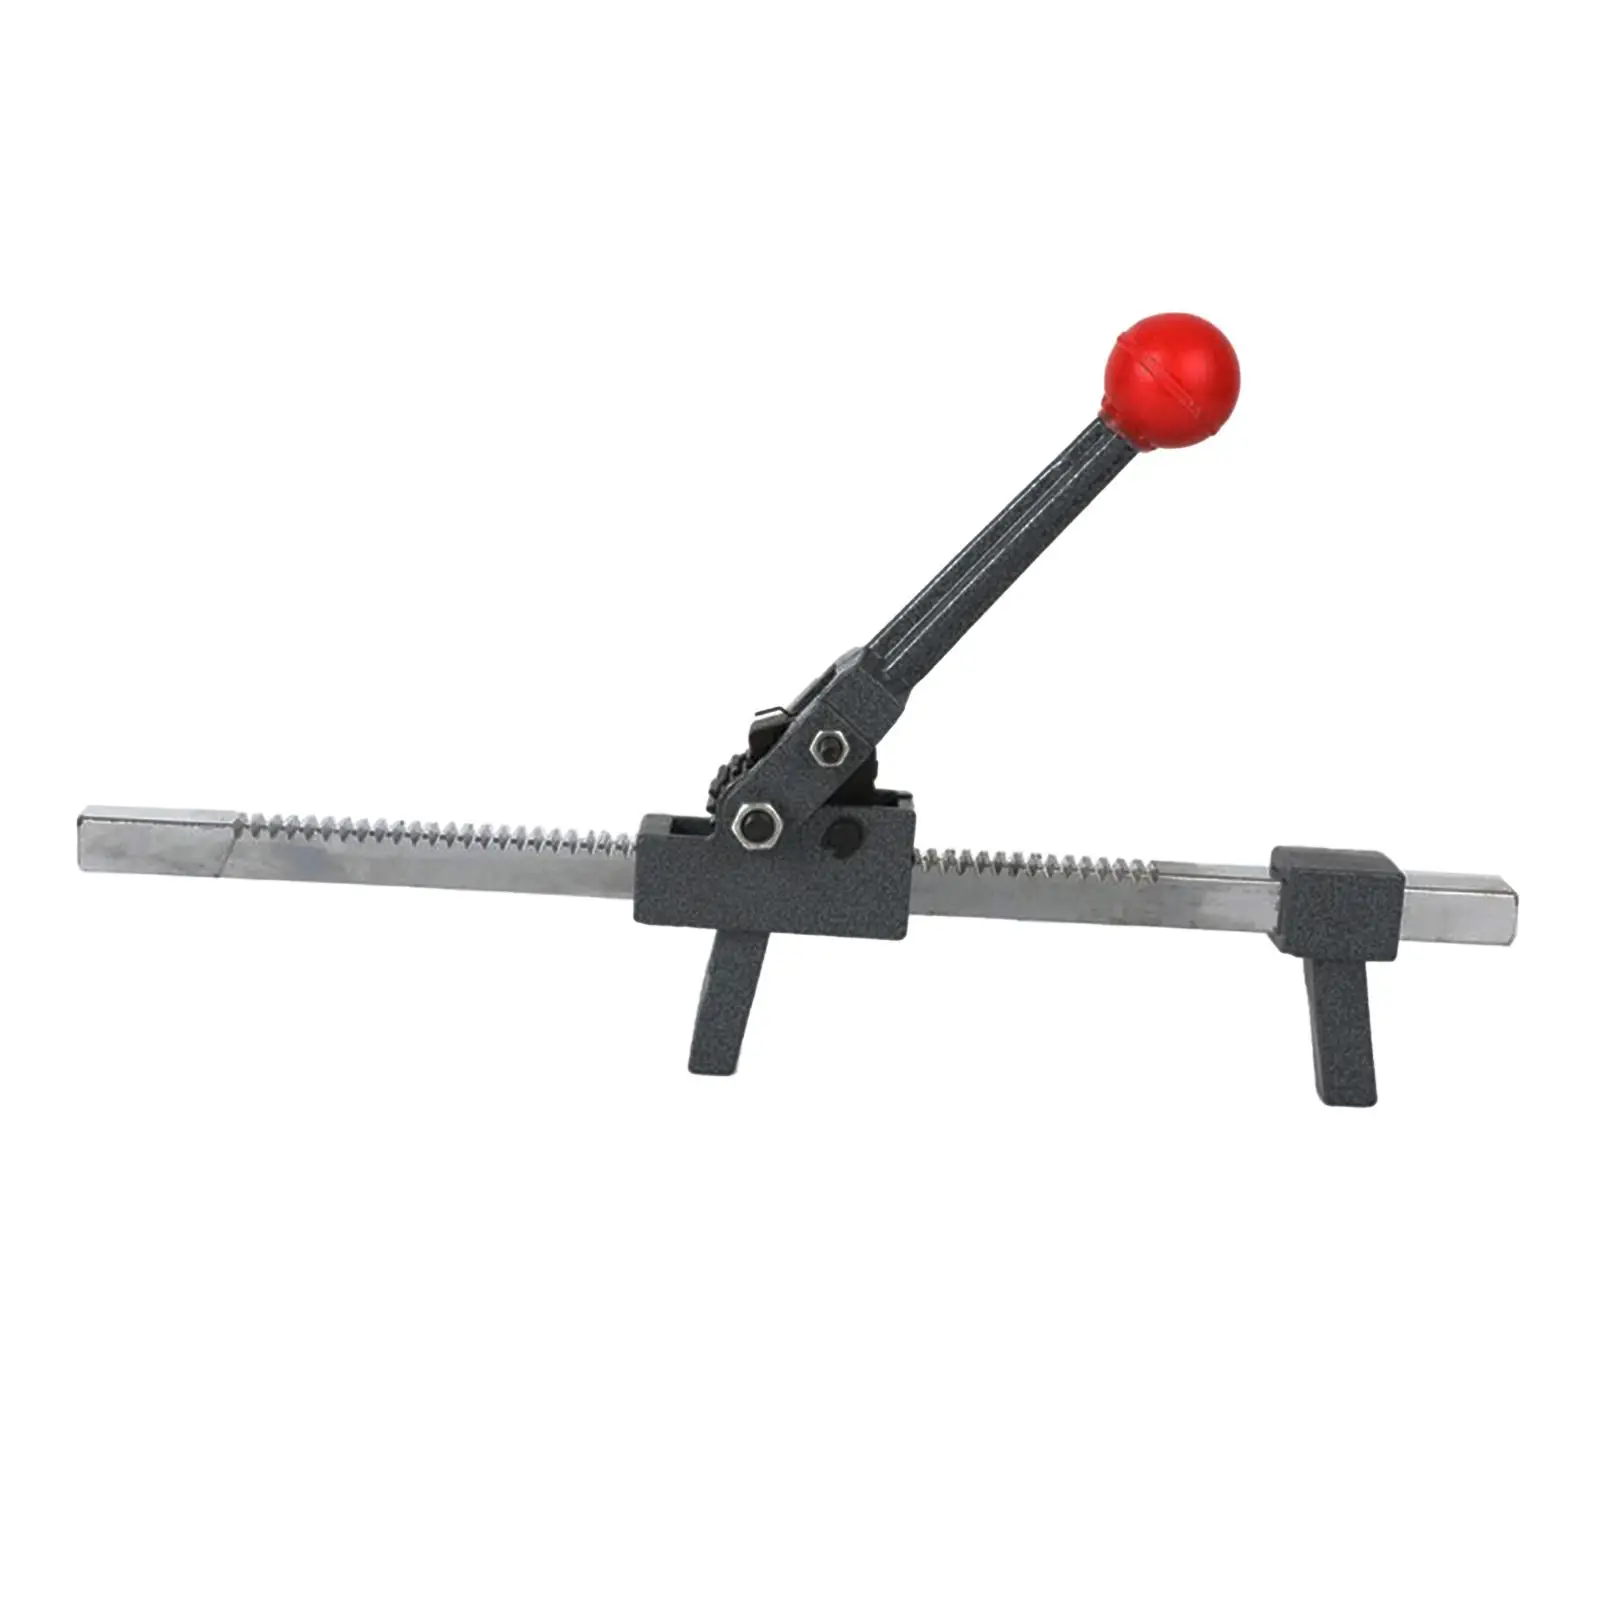 Manual Tire Changer Replaces Vacuum Tire Changer Tool for Small Auto Shop Durable High Performance Easy to Use Mounting Tool